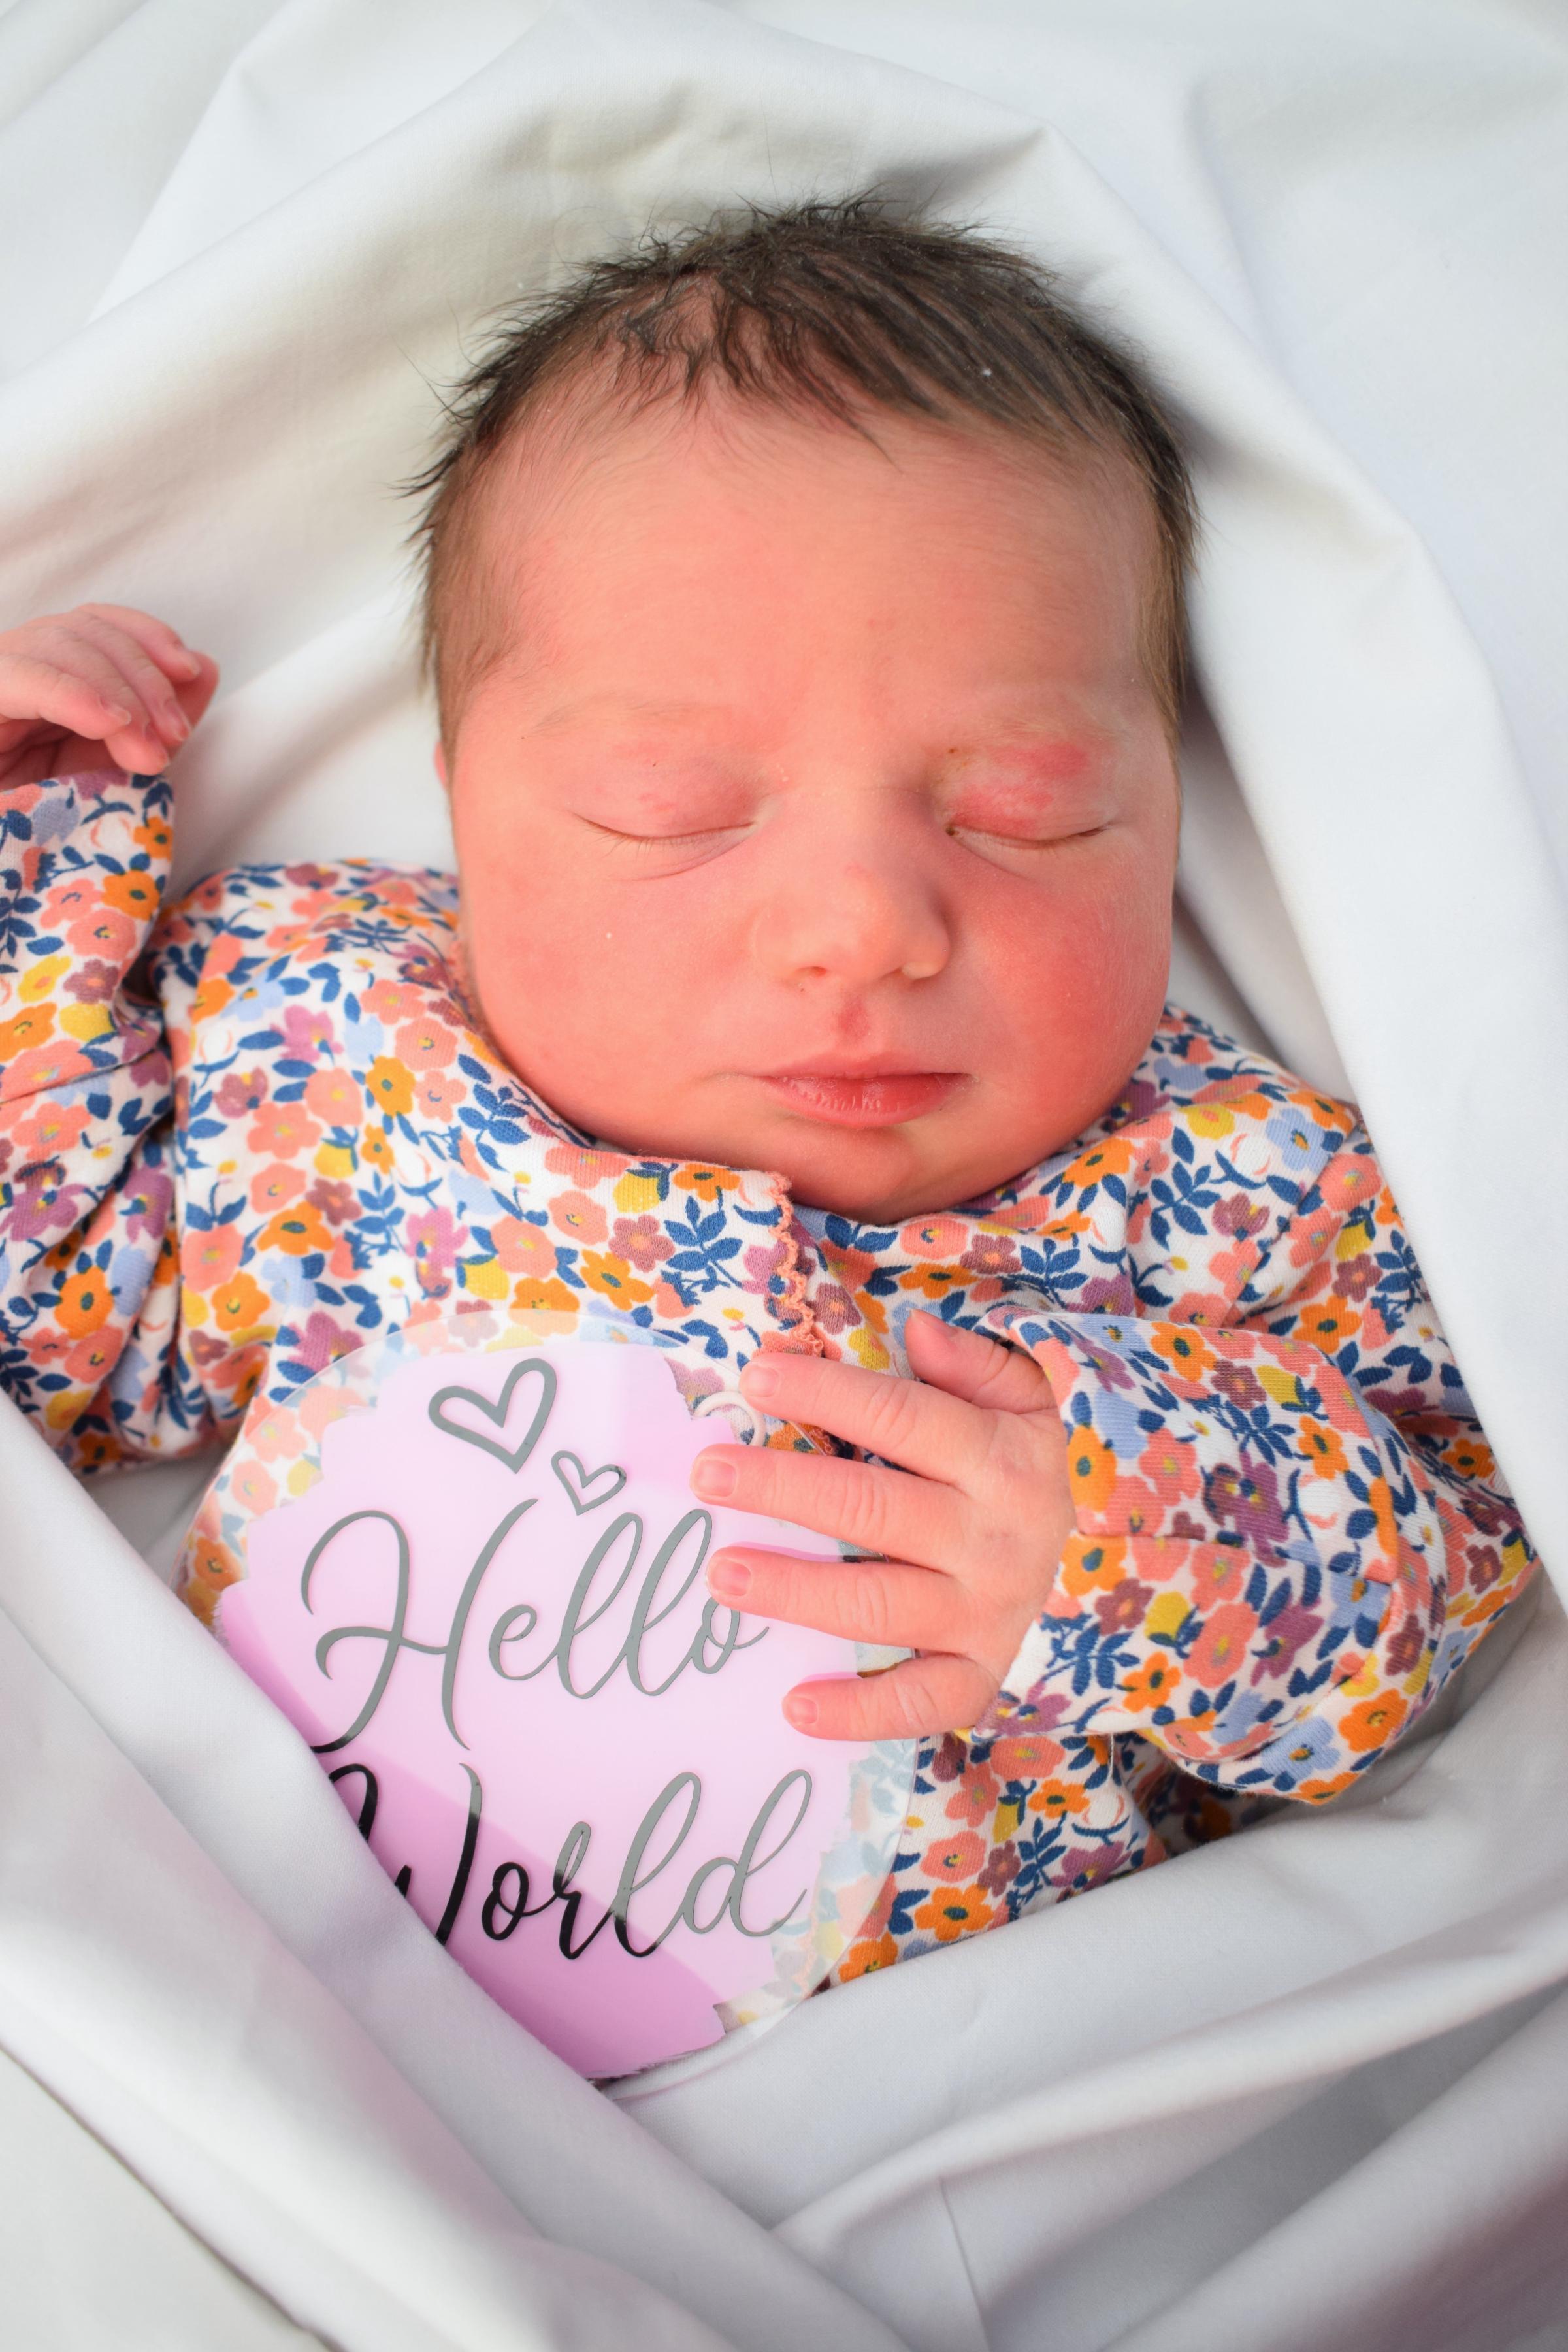 Emilia Webster made a super speedy arrival on February 6